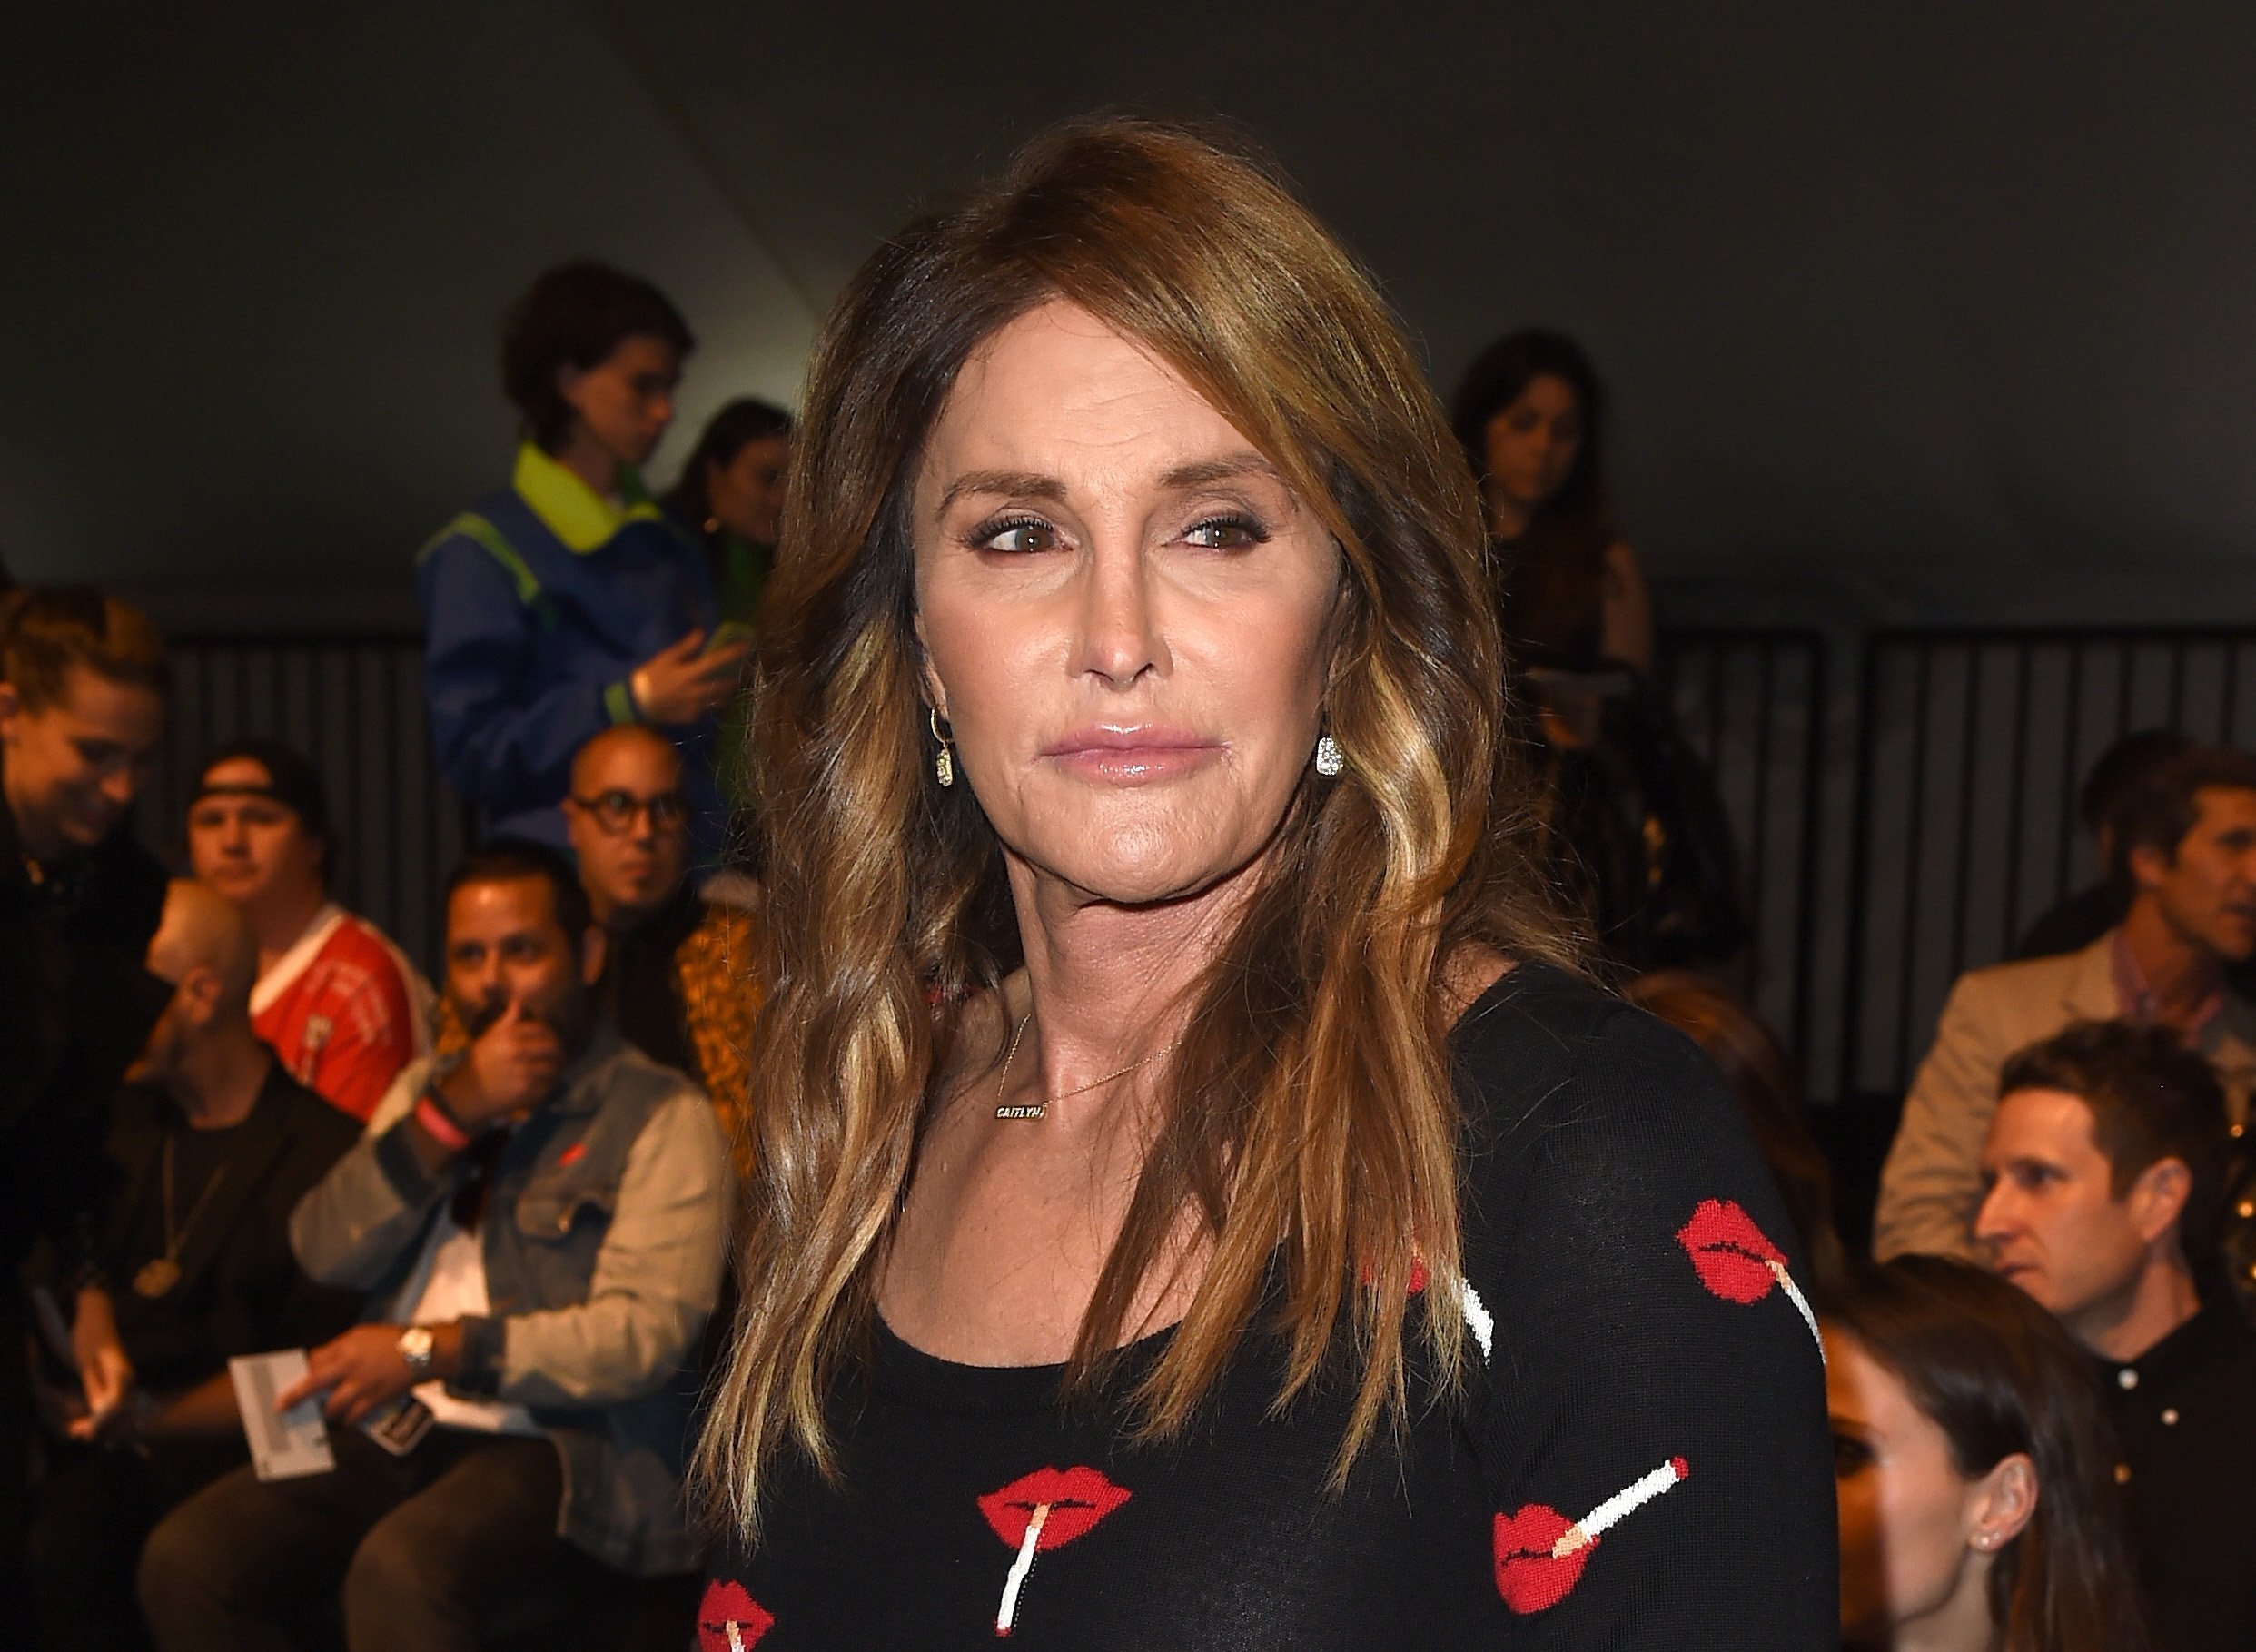 Caitlyn Jenner attends the "MADE LA at L.A" live event deck on June 10, 2016. | Photo: Getty Images